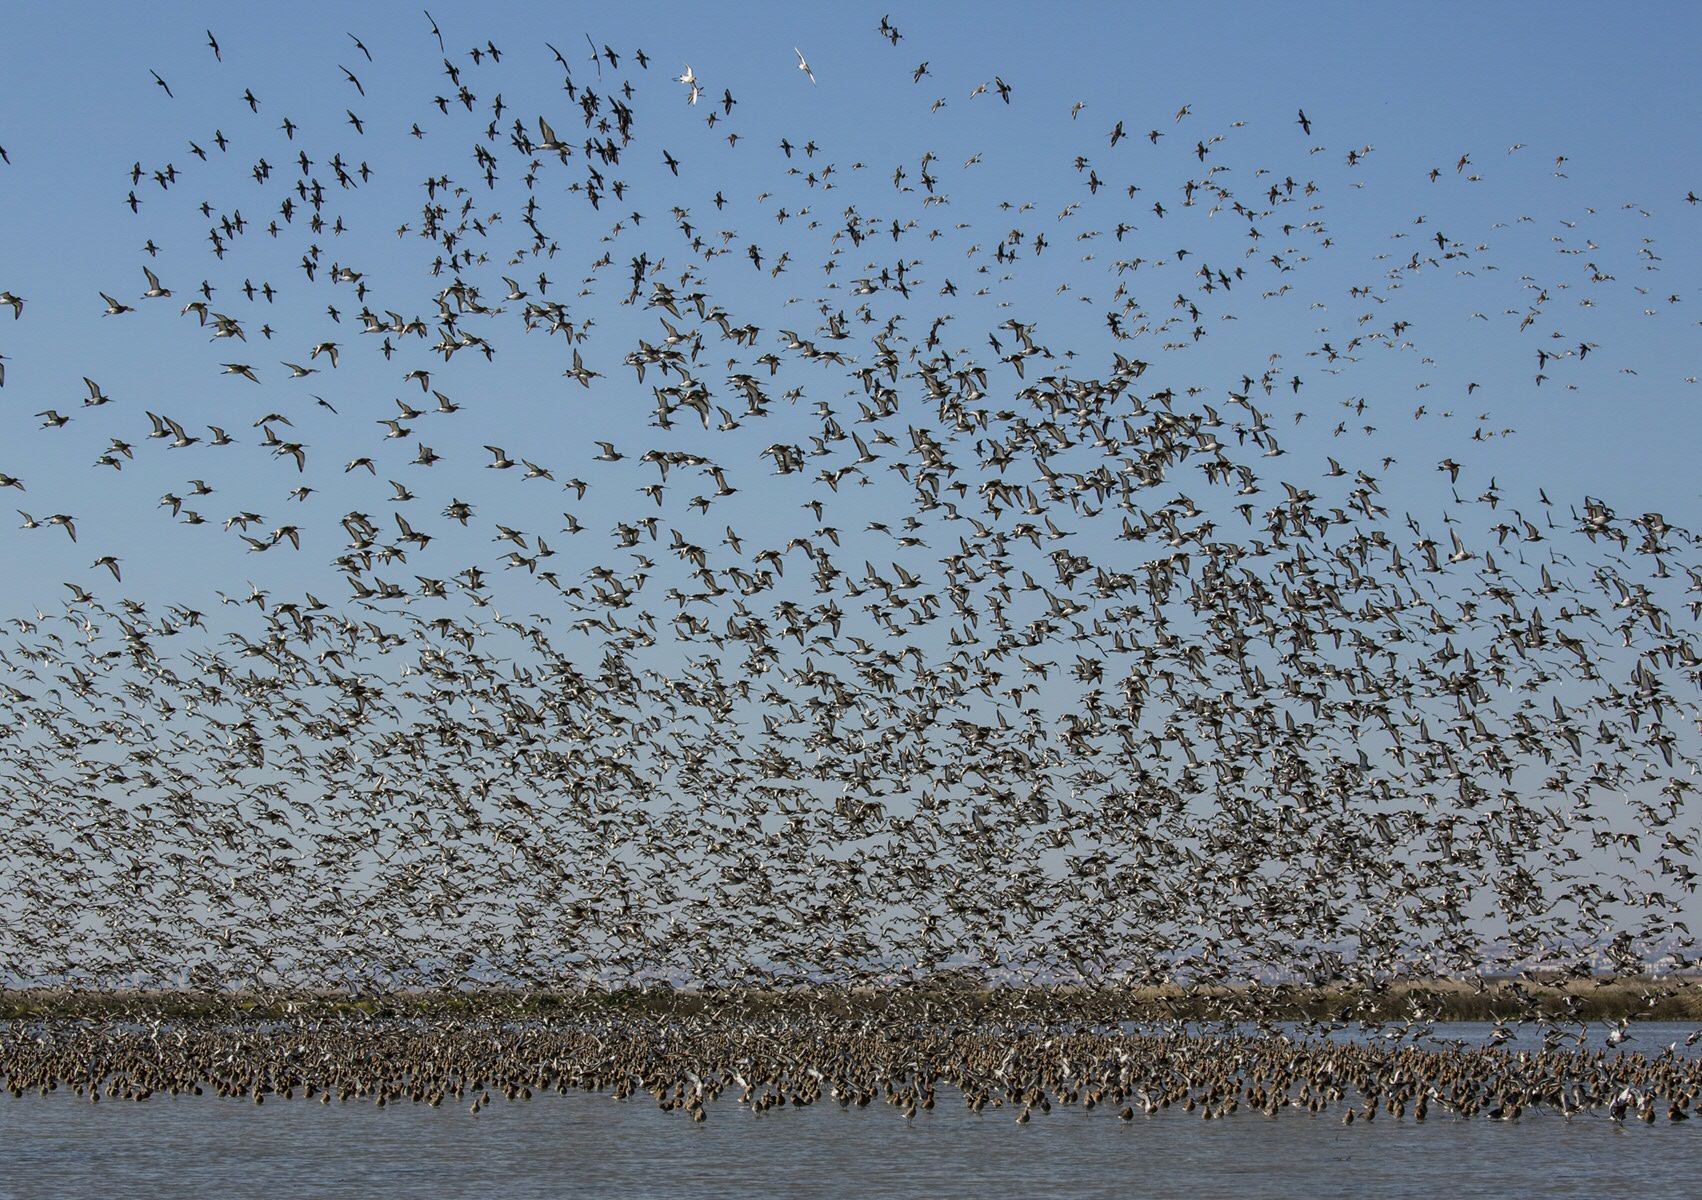 Photo: A flock of black-tailed godwits (Limosa limosa) spiral into a rice field outside Lisbon, Portugal. The rice fields of the Tagus Estuary hold more than fifty thousand godwits during northward migration every year. Photo credit: Jan van de Kam